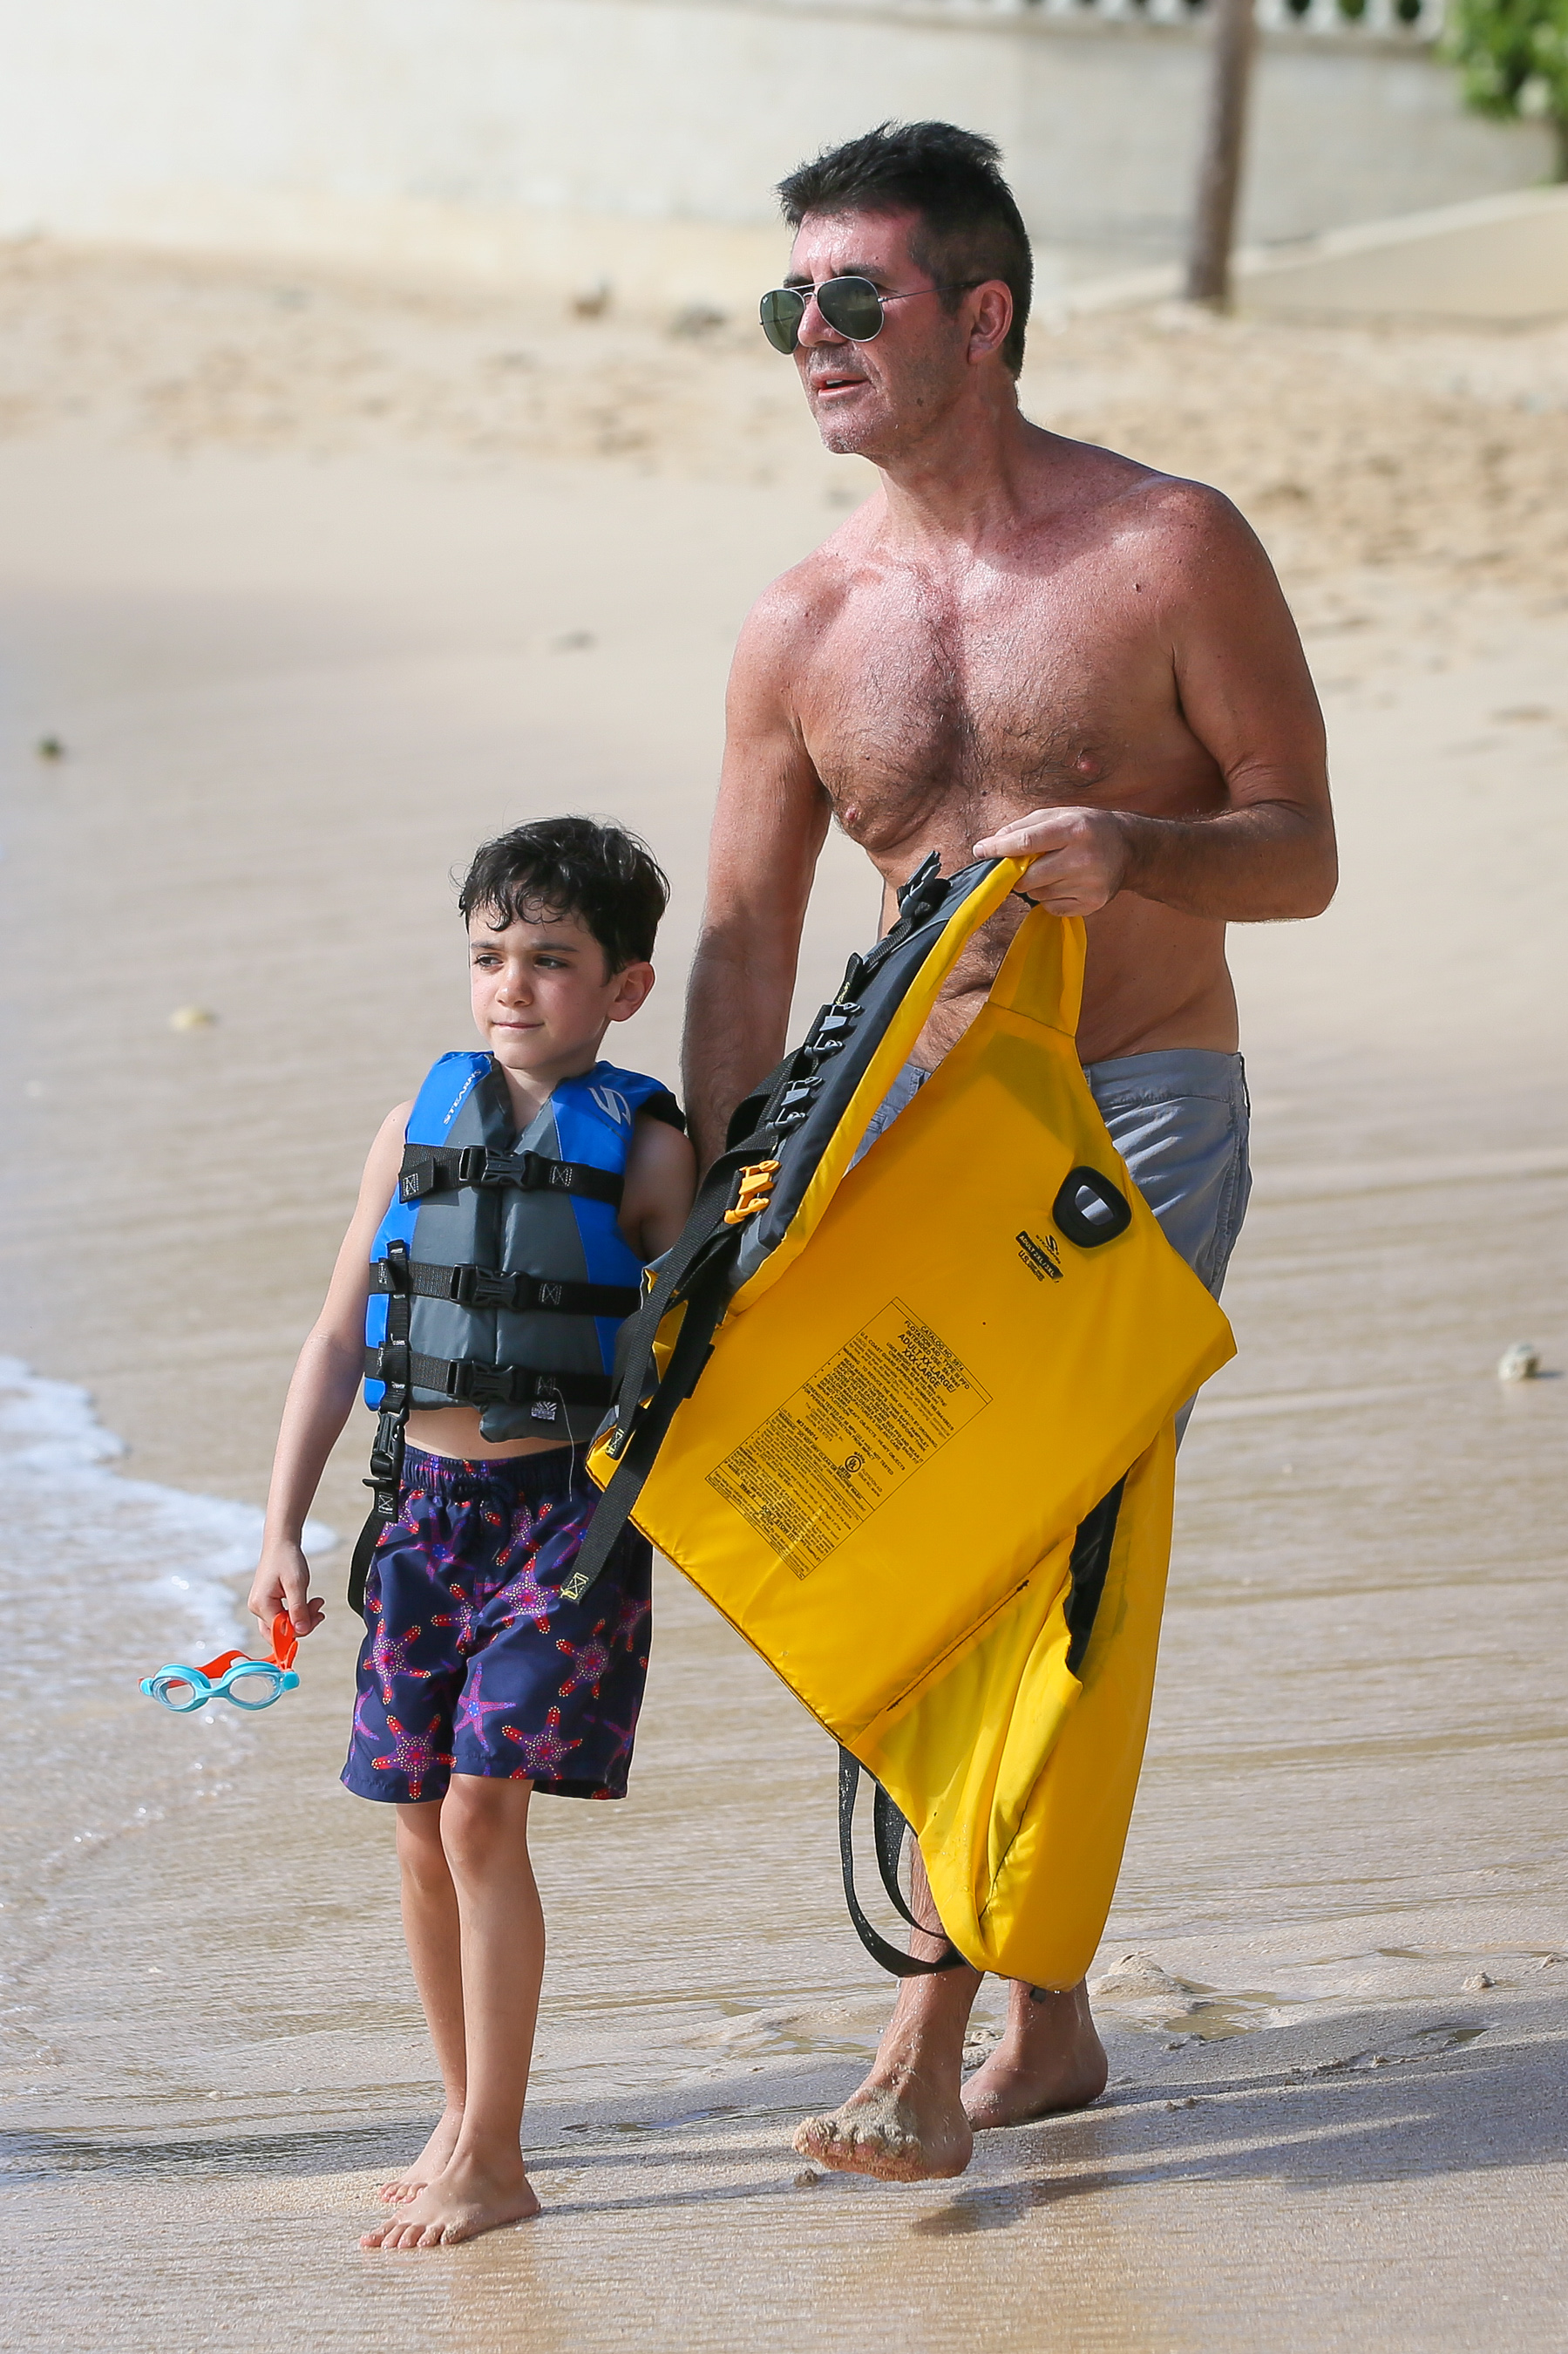 Simon Cowell is seen with his son Eric Cowell on the beach, on December 22, 2019, in Bridgetown, Barbados. | Source: Getty Images